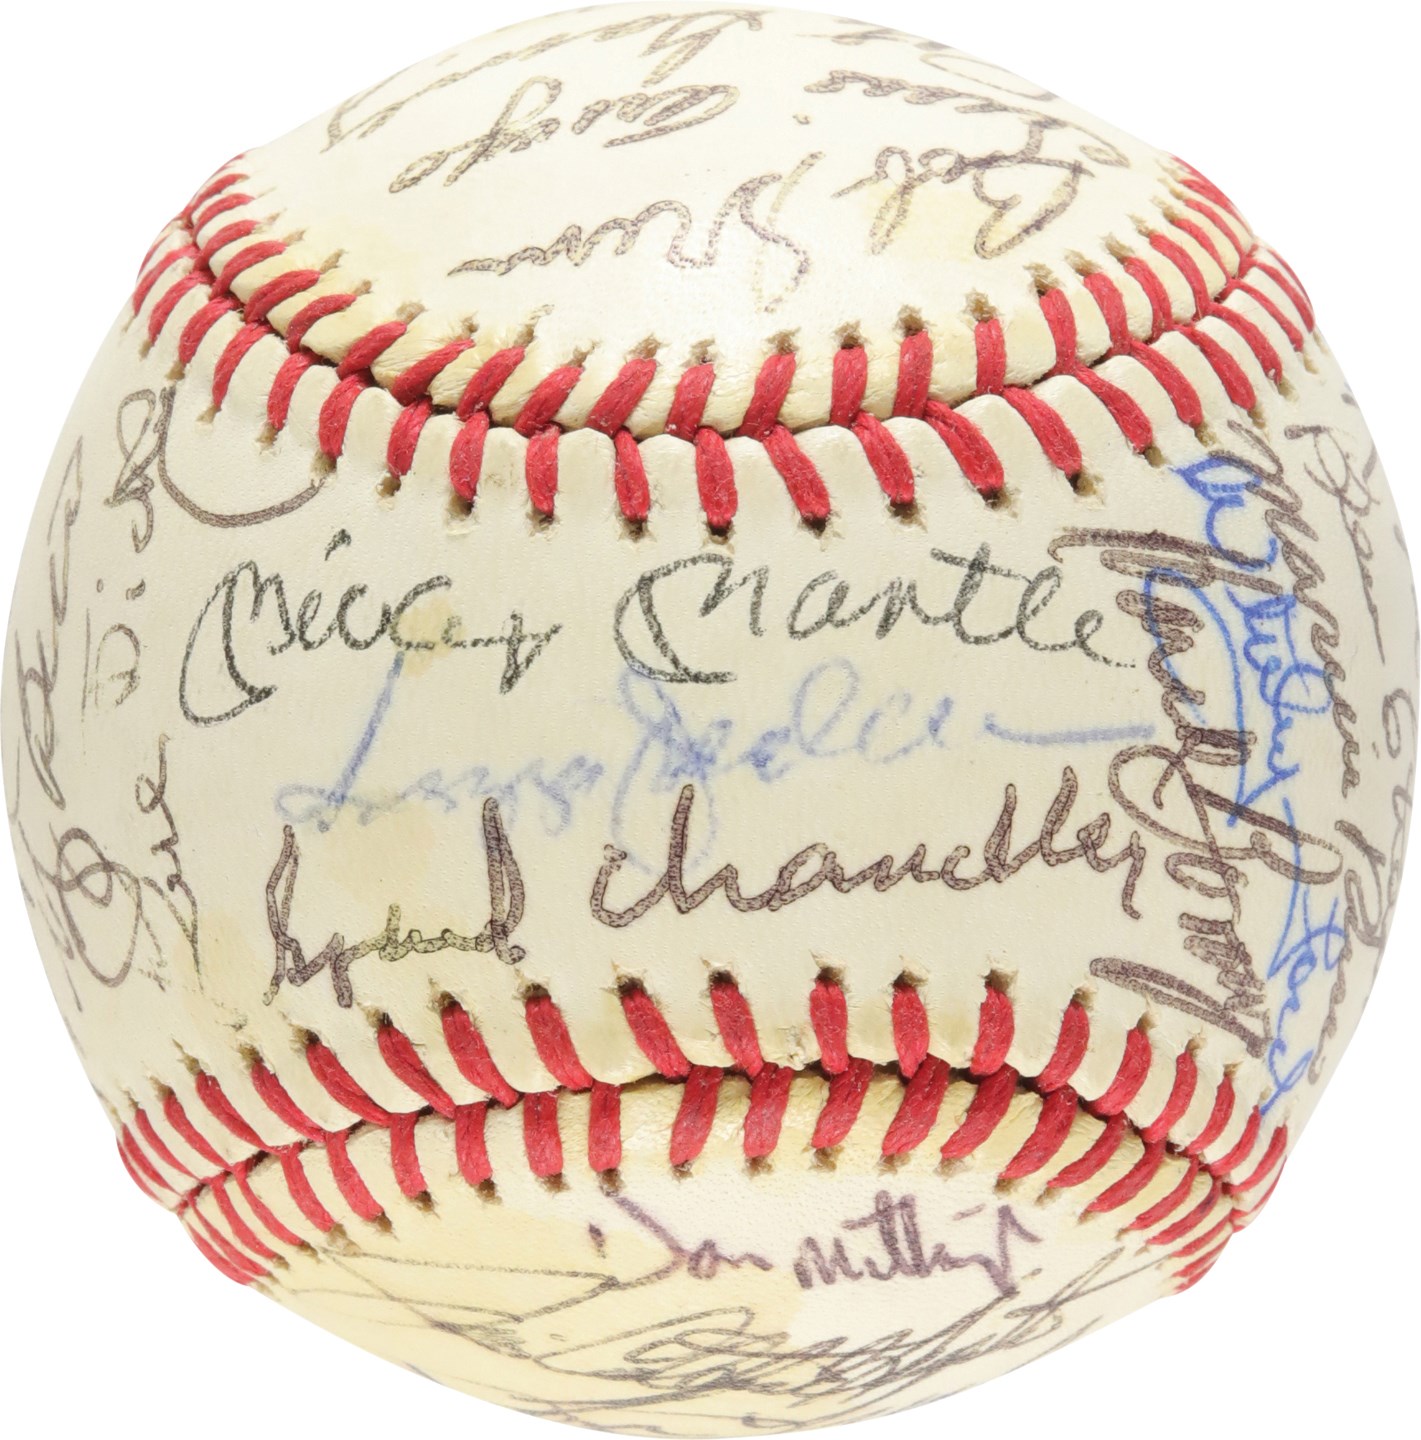 - New York Yankees Signed "History" Ball (36 Signatures Including Mantle, DiMaggio, Maris & Nine Other Hall of Famers) (PSA)